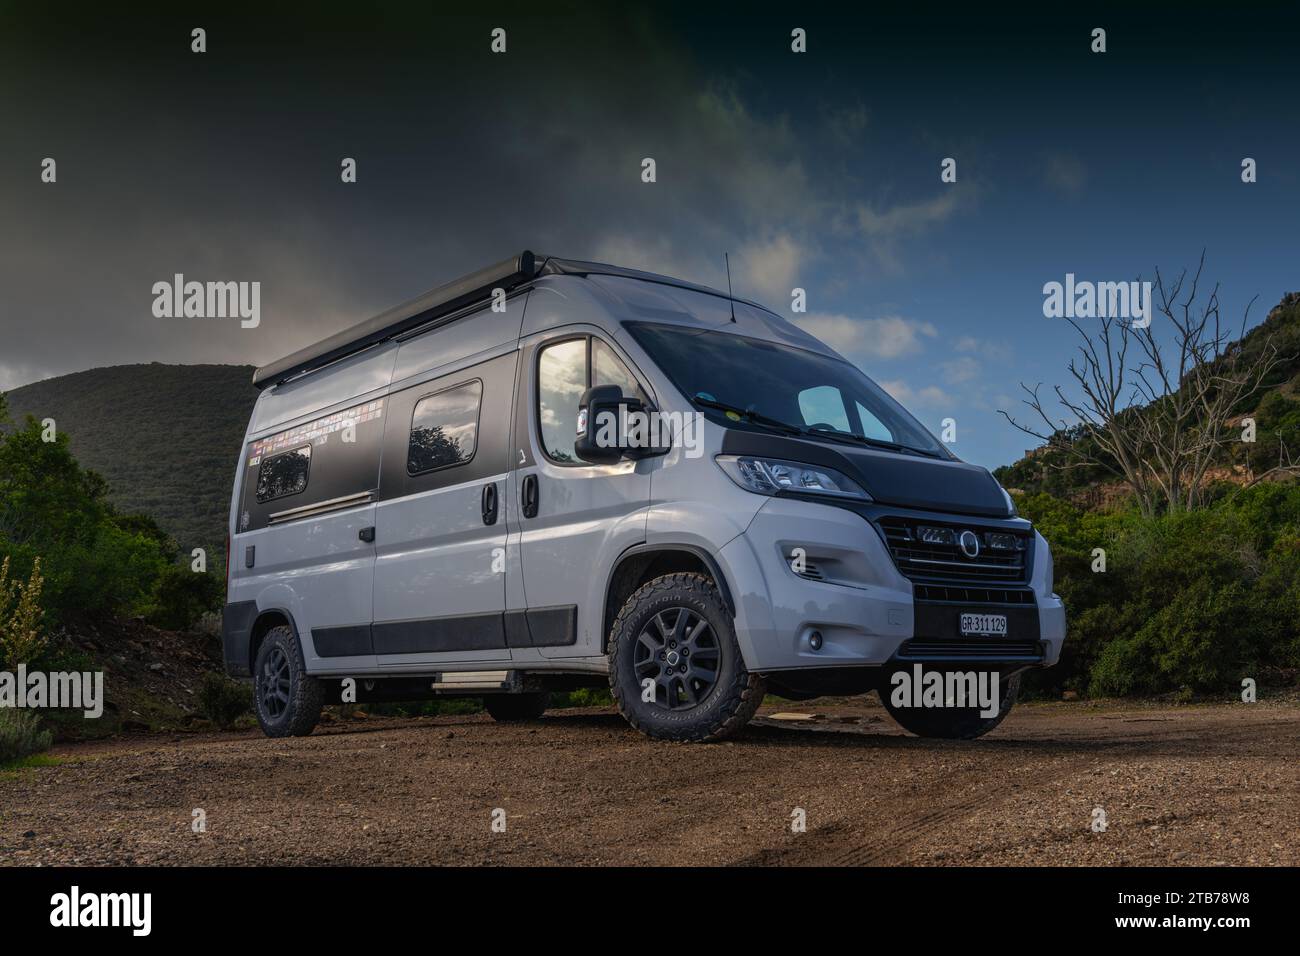 A low angle view of a gray campervan parked on a red dirt road Stock Photo